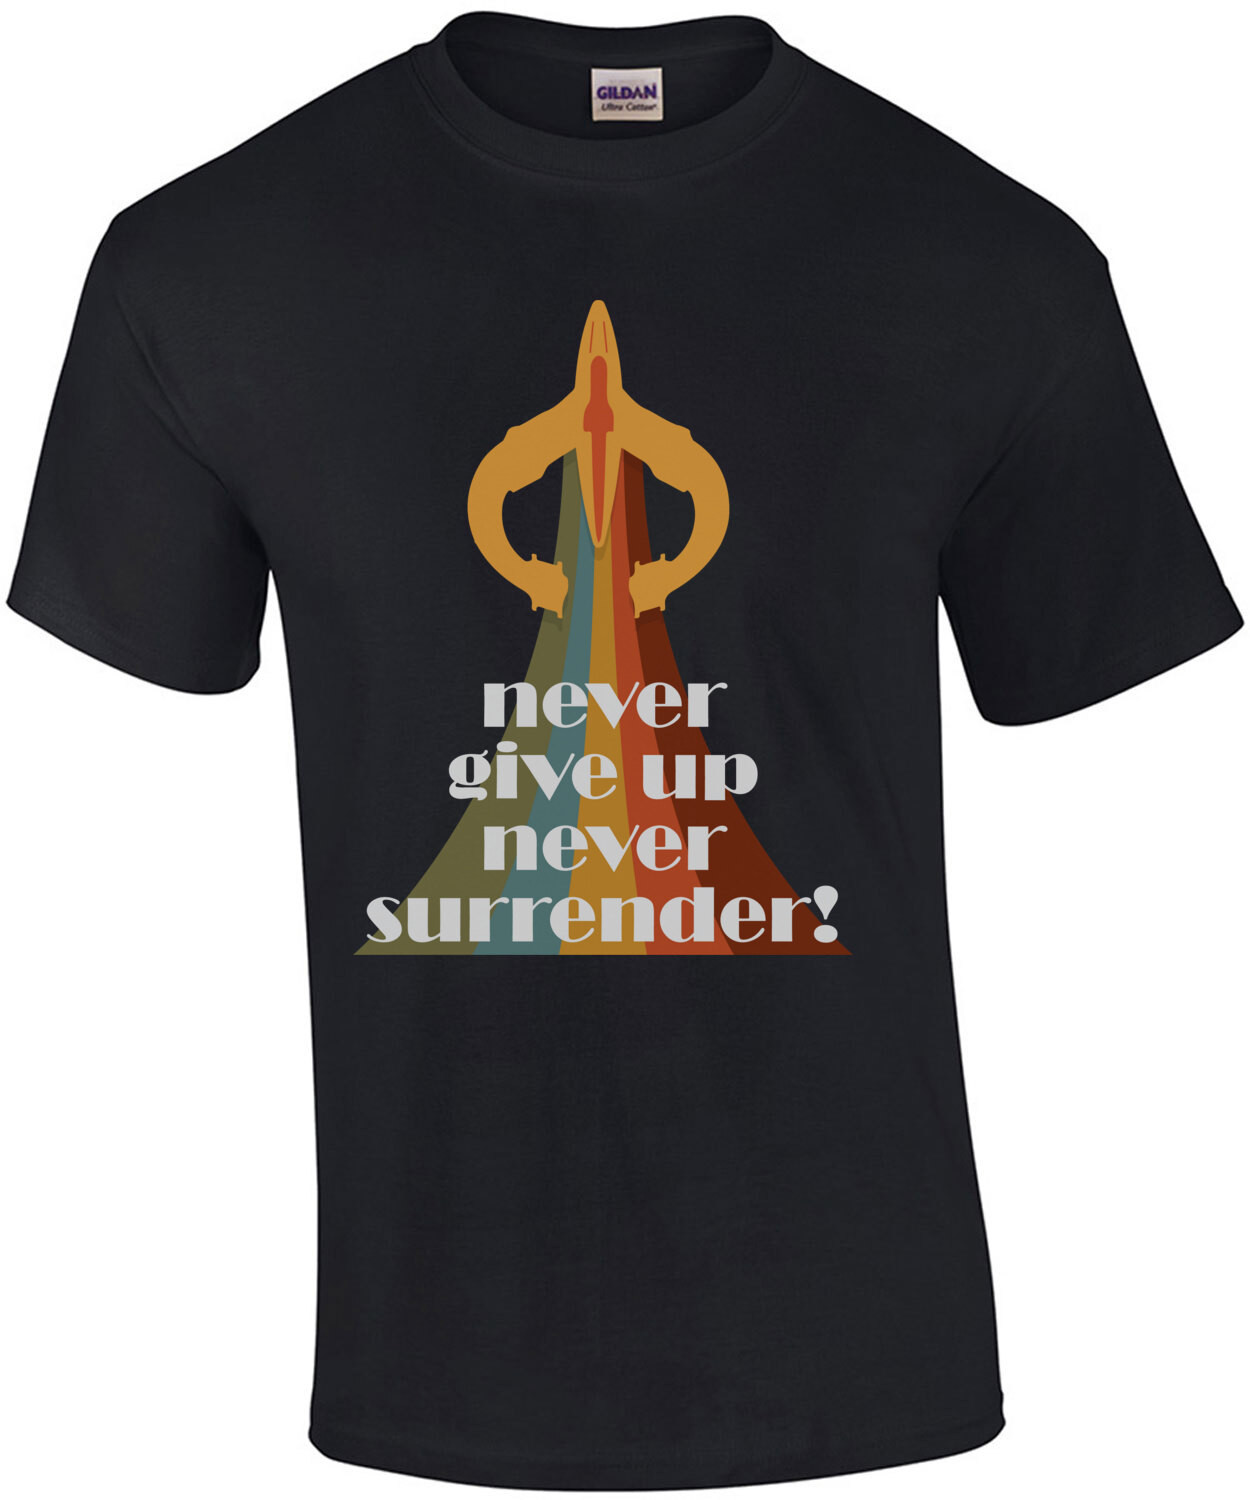 Never giver up - Never Surrender! - Galaxy Quest - 90's T-Shirt